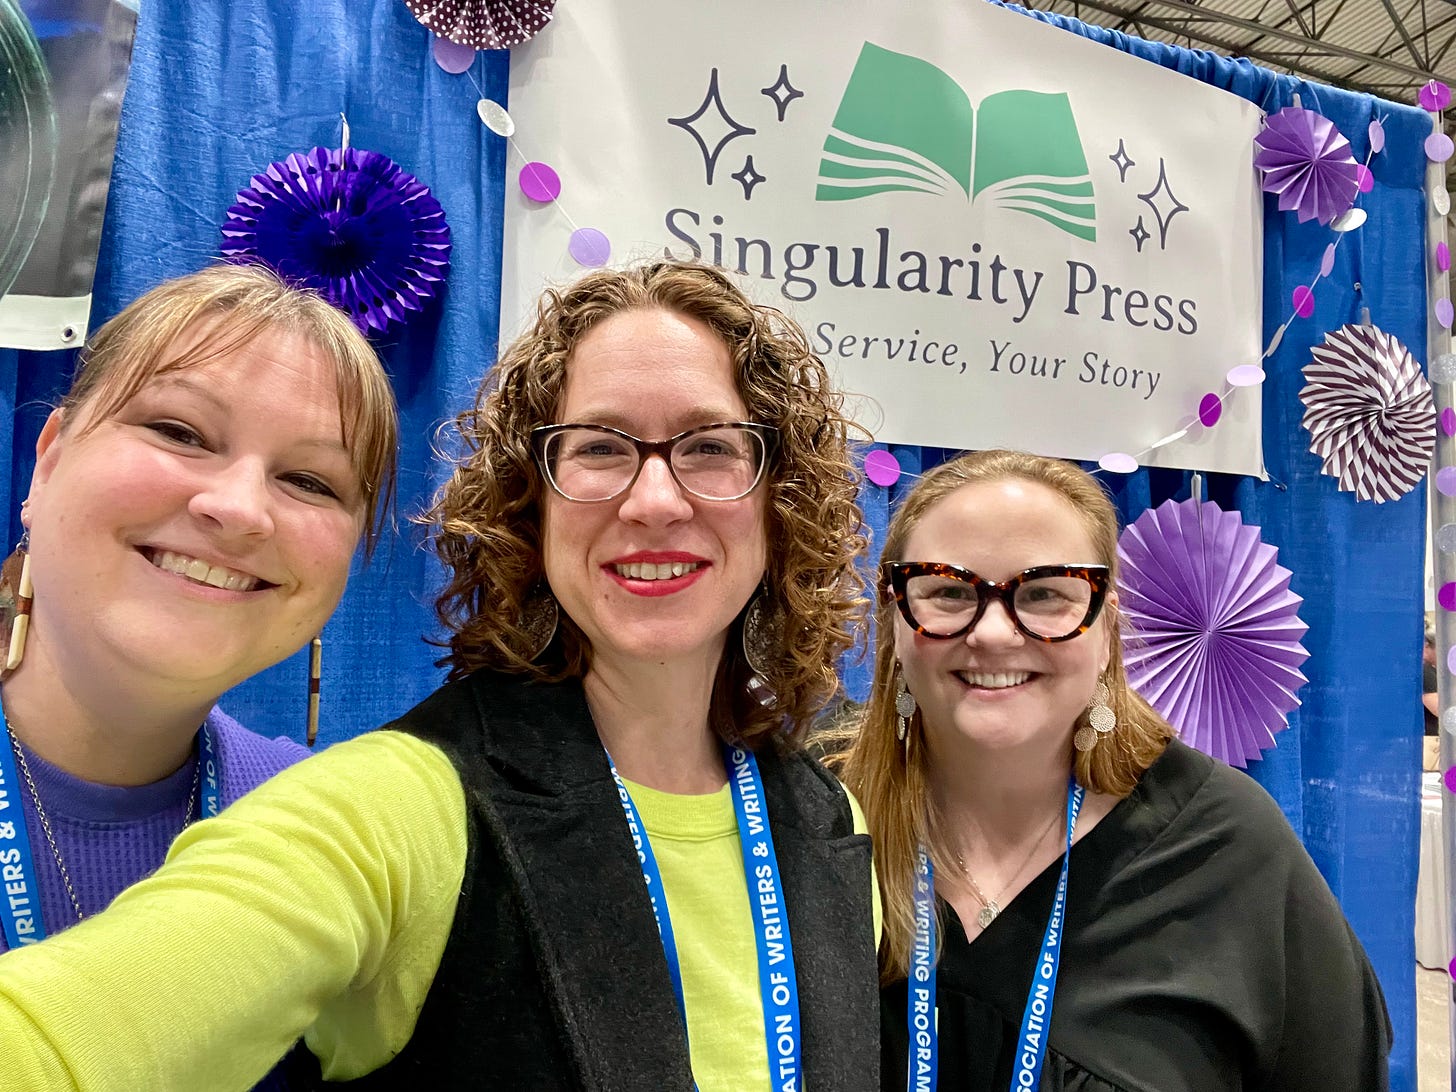 A selfie of three white women, one with hair pulled back and dangling earrings, one with long strawberry blond hair and dangle earrings and big glasses, one in the middle (me) in a. yellow sweater and gray vest. Behind us is a sign that reads "Singularity Press" with purple accordion fans dangling around it.